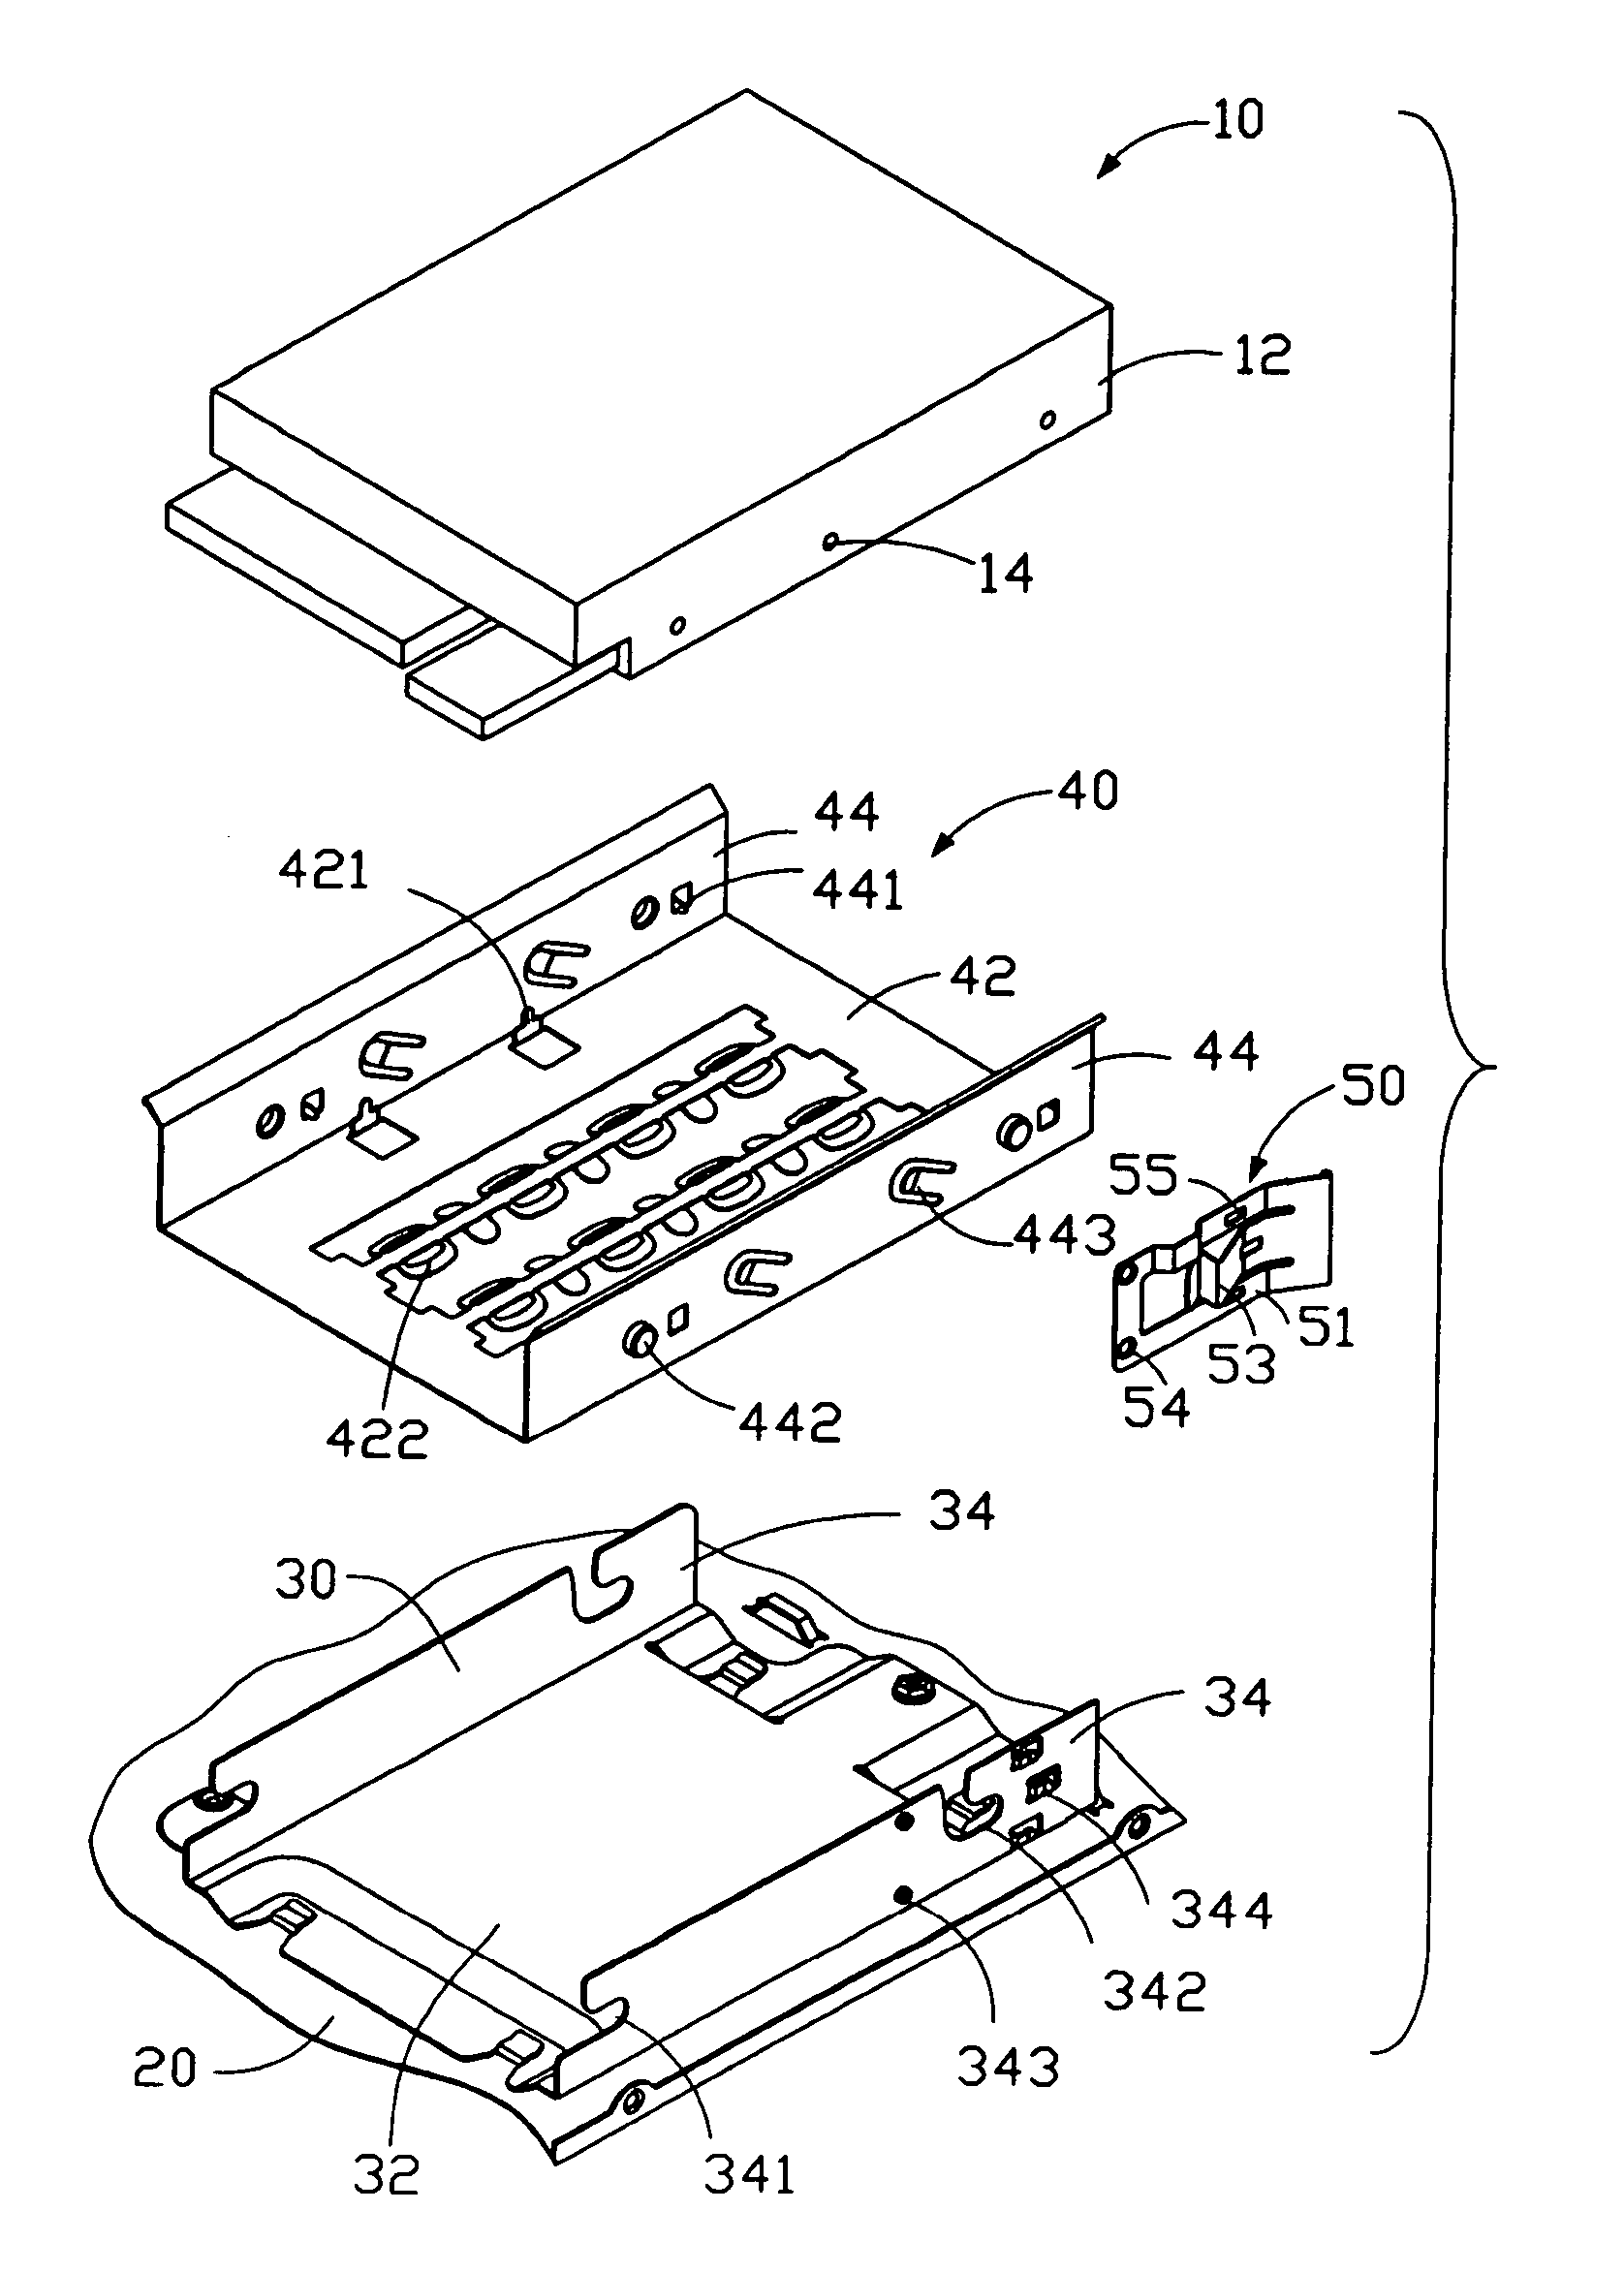 Mounting apparatus for data storage device